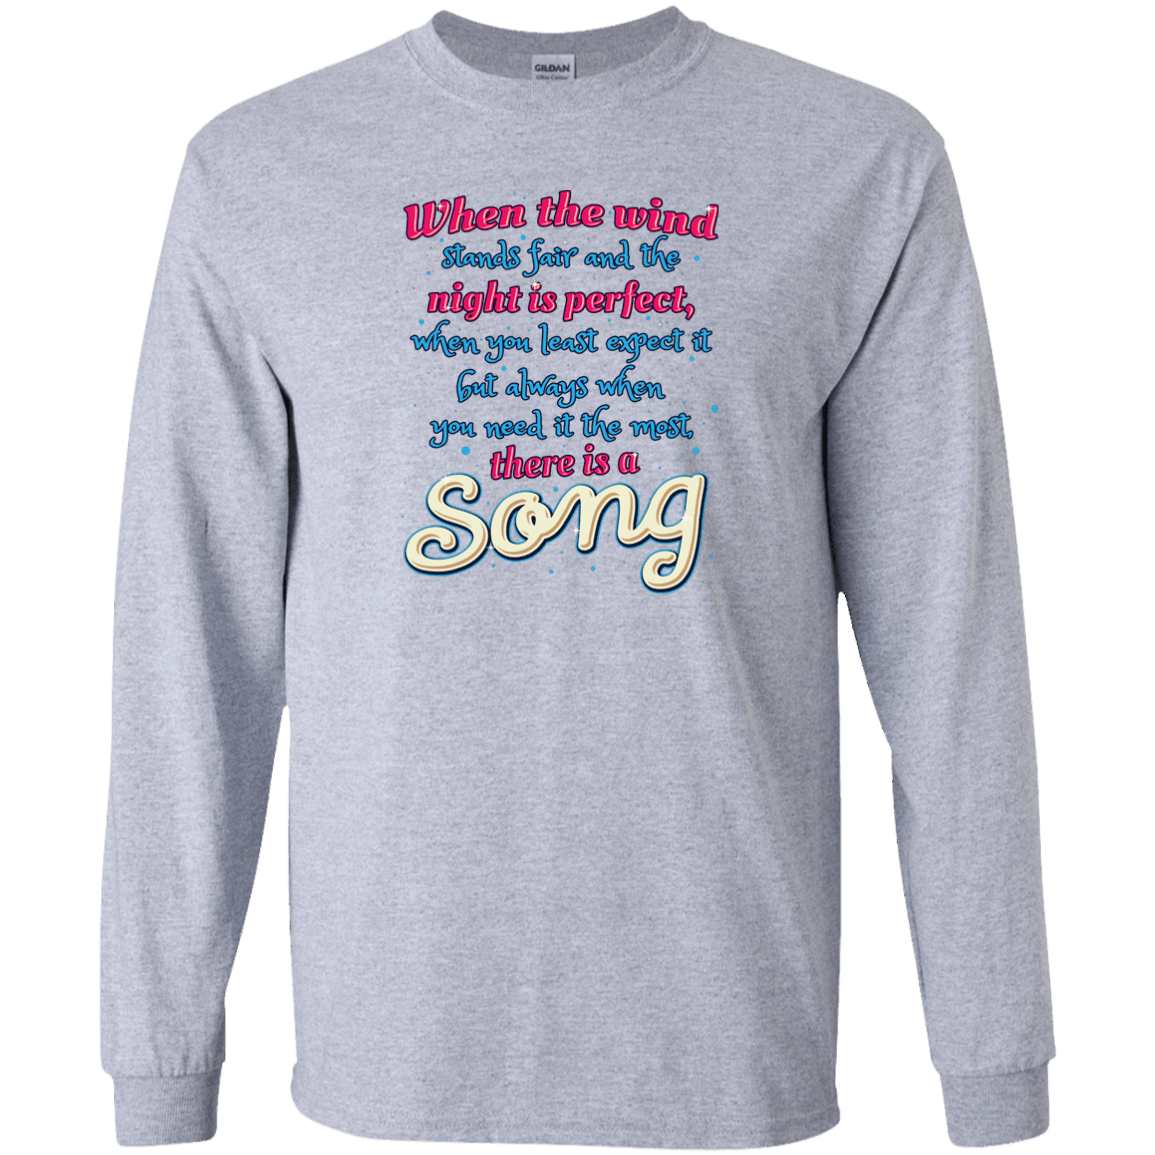 Designs by MyUtopia Shout Out:When you Need it the Most There Is A Song Long Sleeve Ultra Cotton Unisex T-Shirt,S / Sport Grey,Long Sleeve T-Shirts